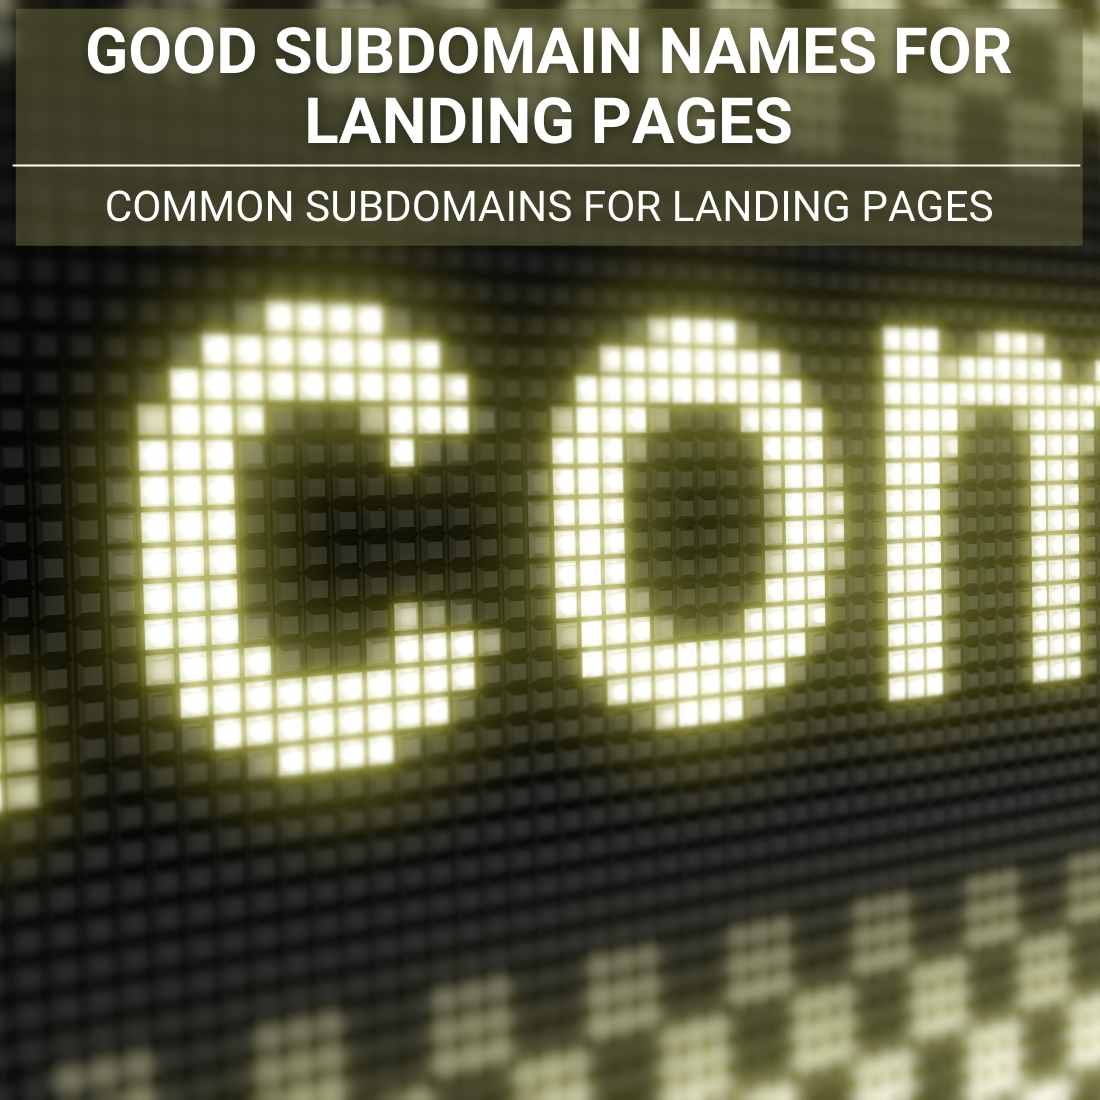 Good Subdomain Names For Landing Pages